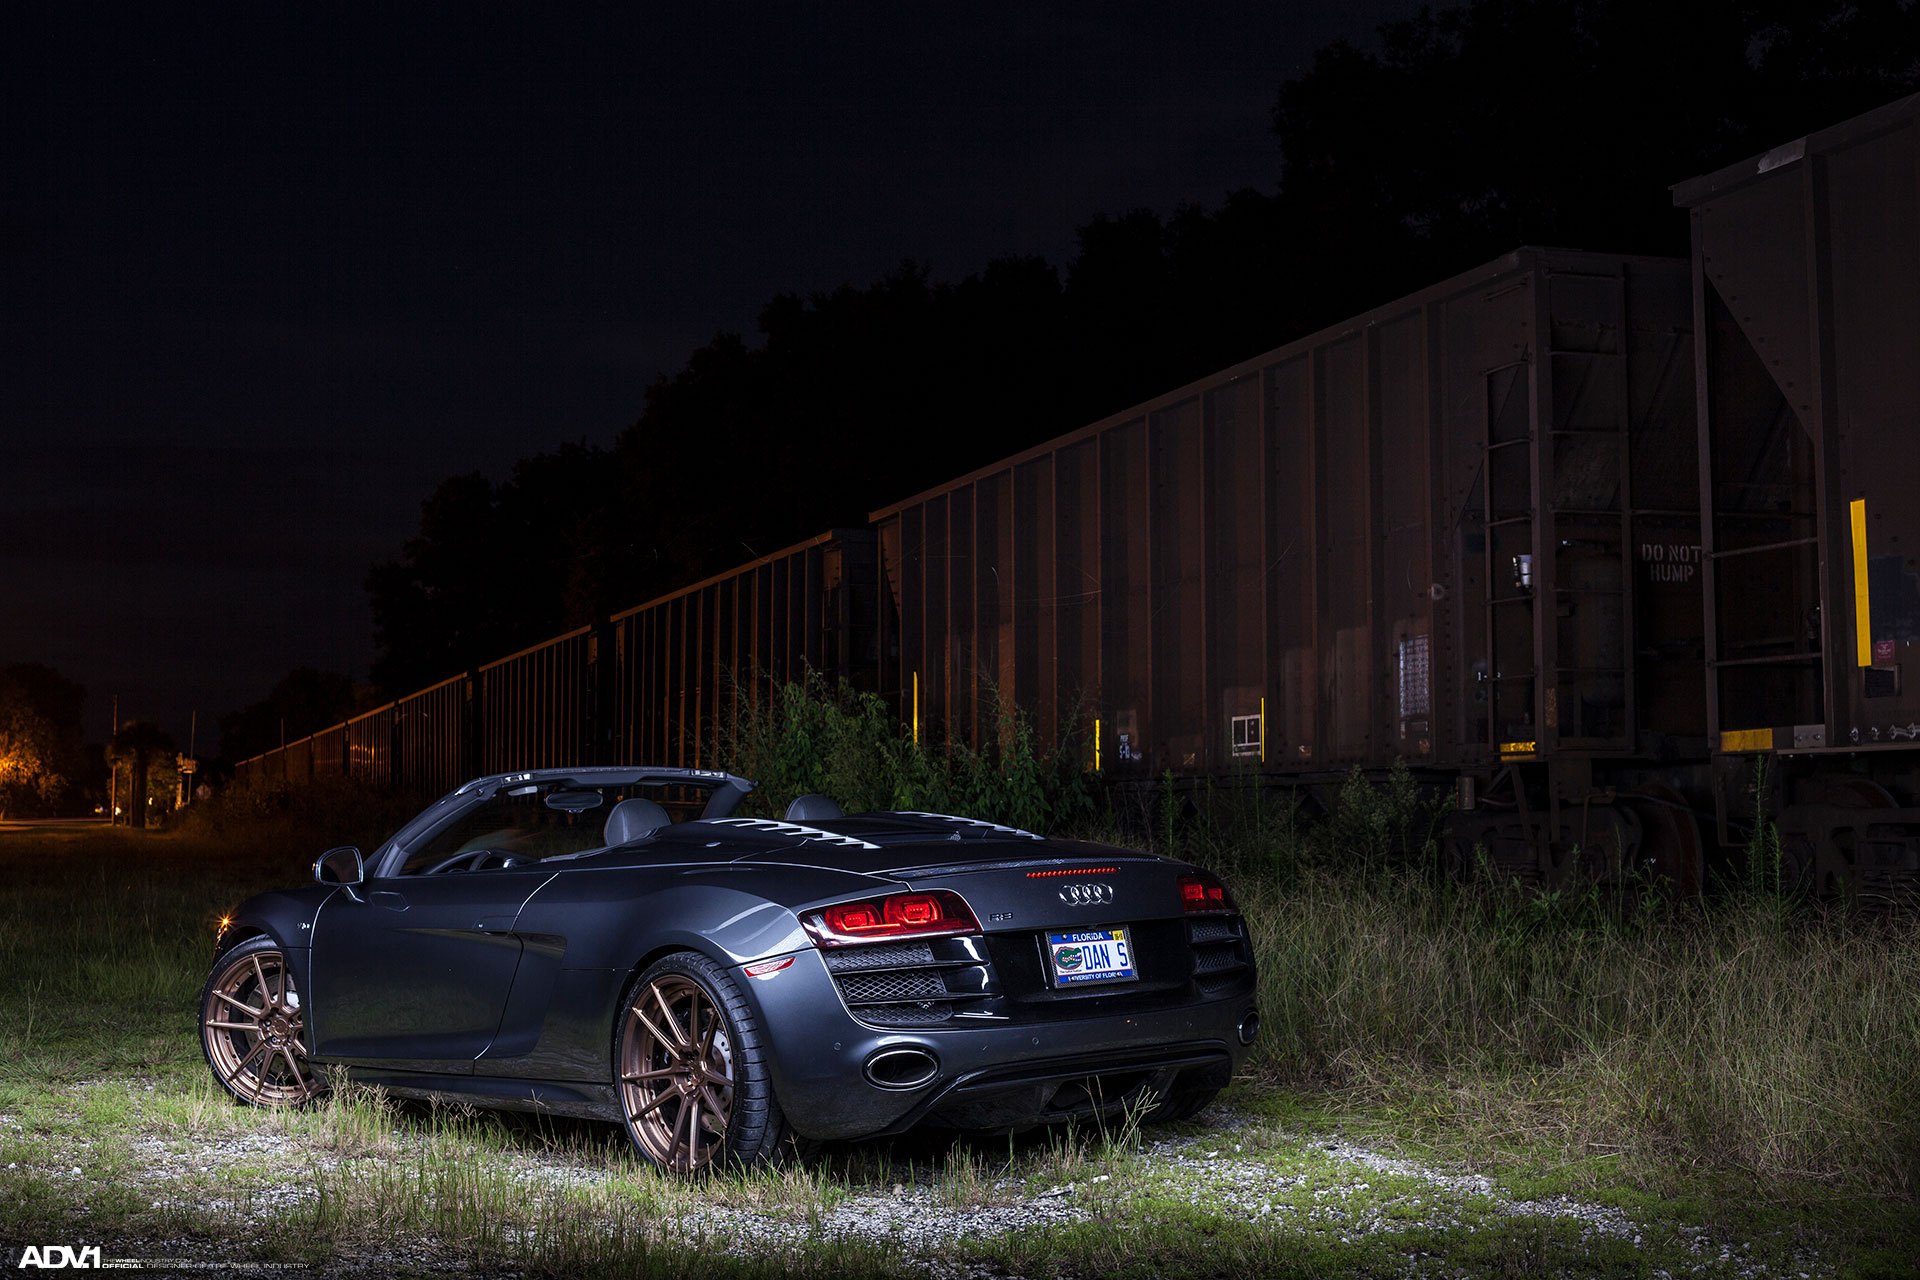 Window Louvers on Gray Convertible Audi R8 - Photo by ADV.1